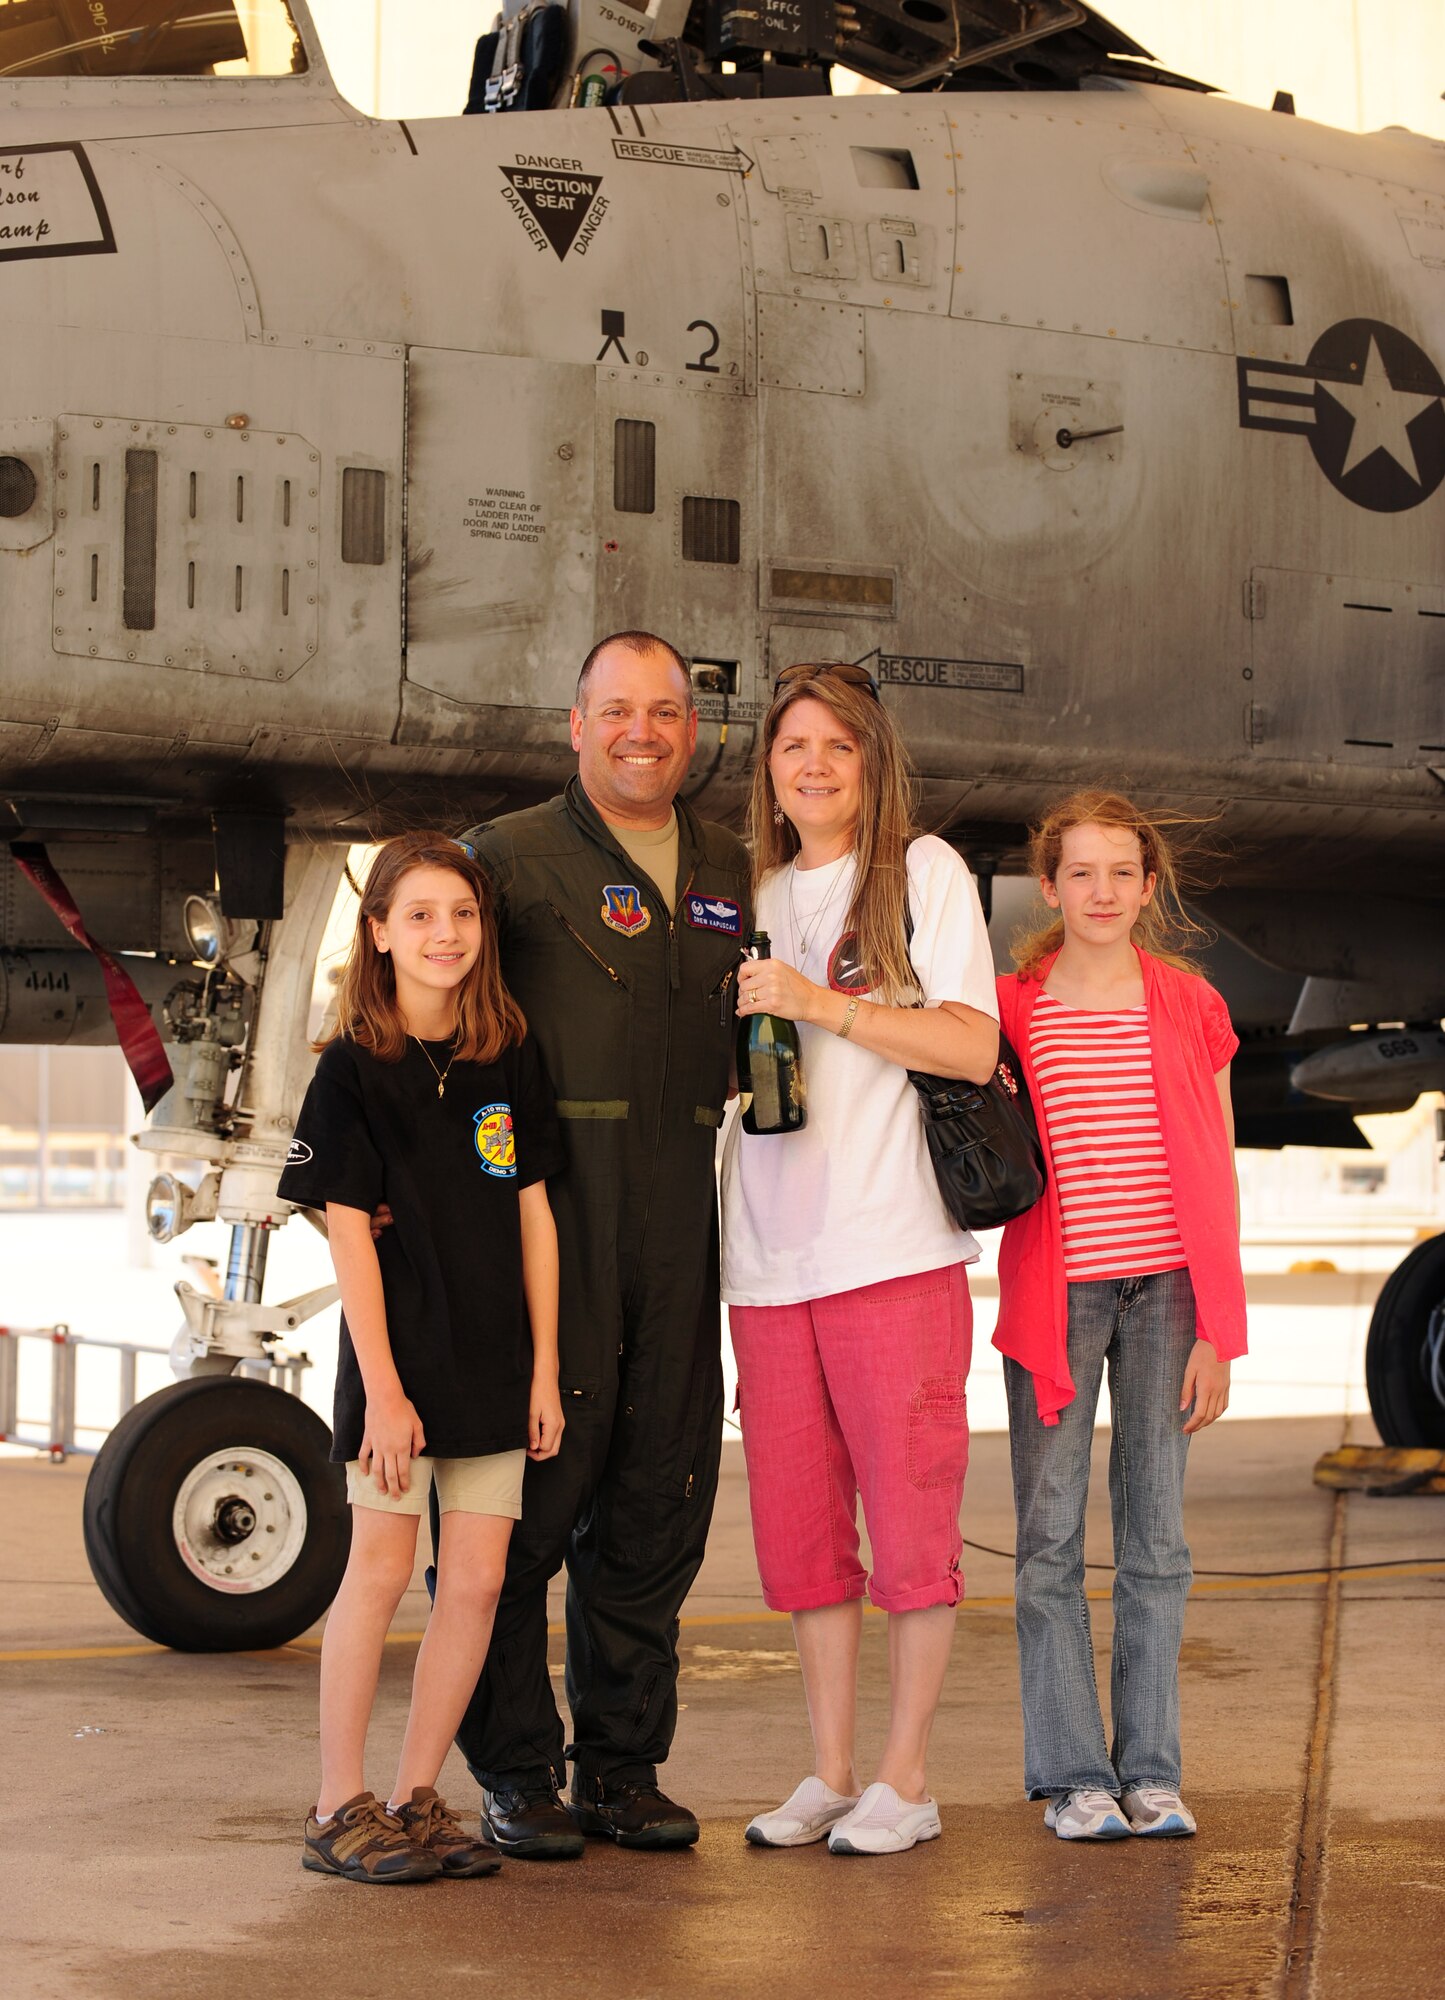 DAVIS-MONTHAN AIR FORCE BASE, Ariz. - Lt. Col. Andrew Kapuscak poses with his family in front of an A-10 aircraft on the flight line here April 27. The colonel’s family greeted him on the flight line on the occasion of reaching his 3,000th flying hour, a milestone in the fighter pilot community. (U.S. Air Force photo/Airman 1st Class Jerilyn Quintanilla)